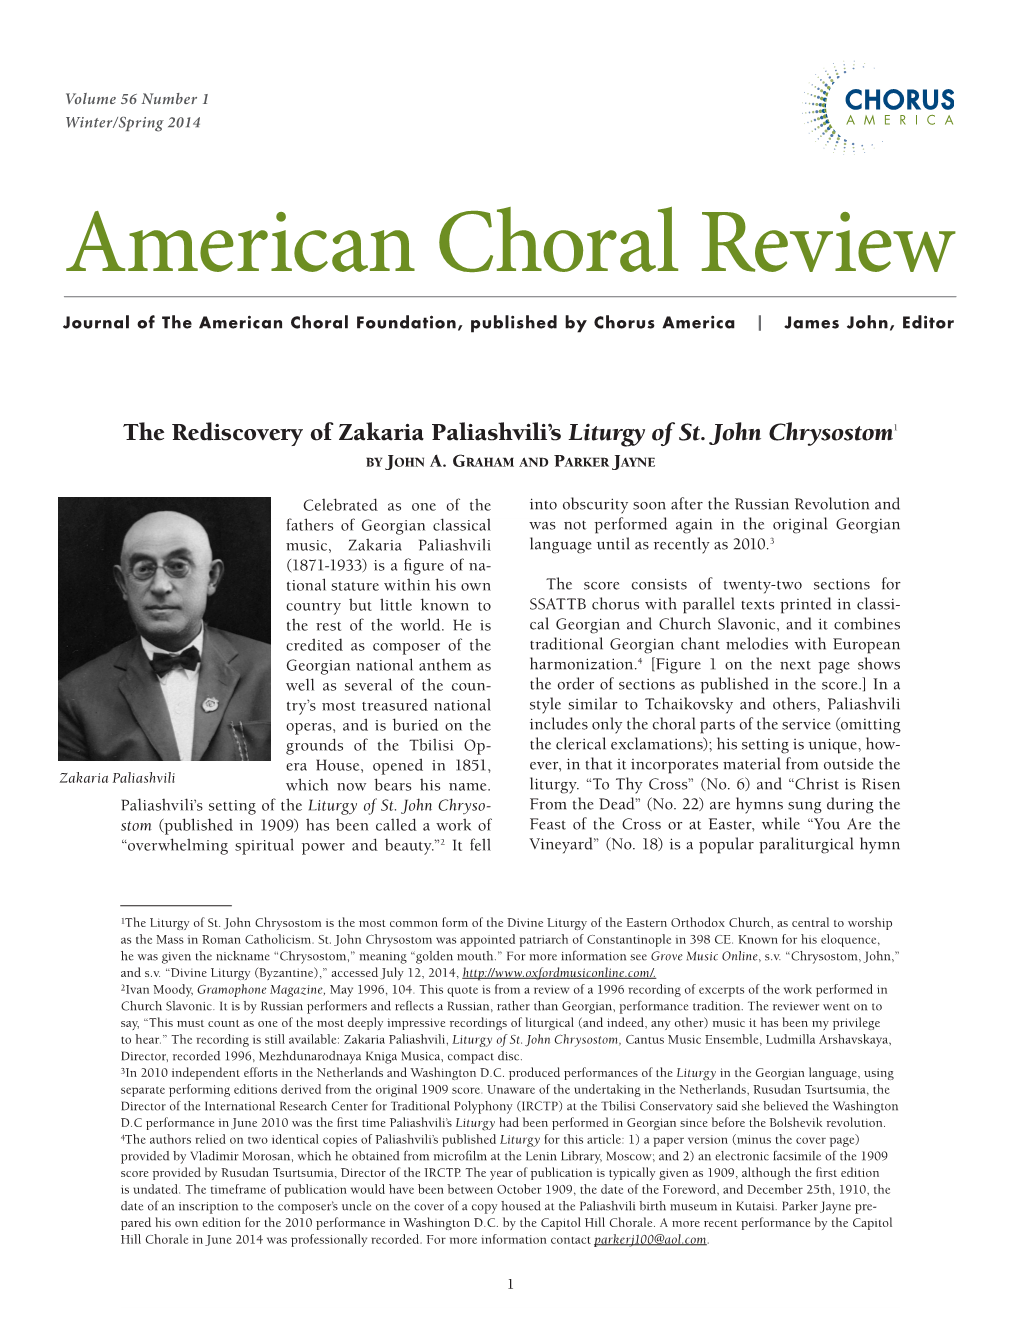 American Choral Review Article